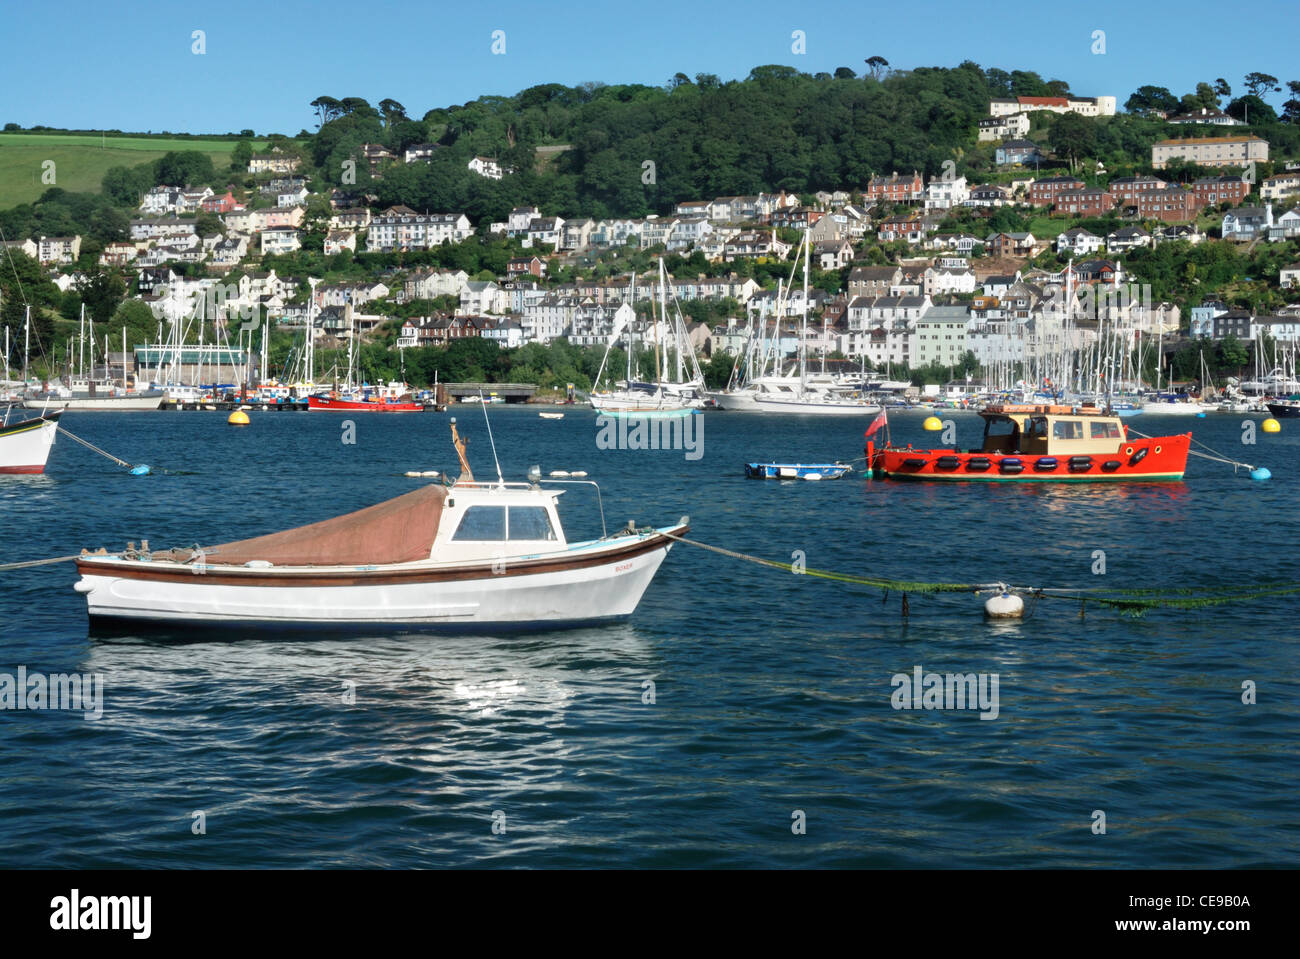 Mouth of the river dart at Dartmouth, devon, england,uk Stock Photo